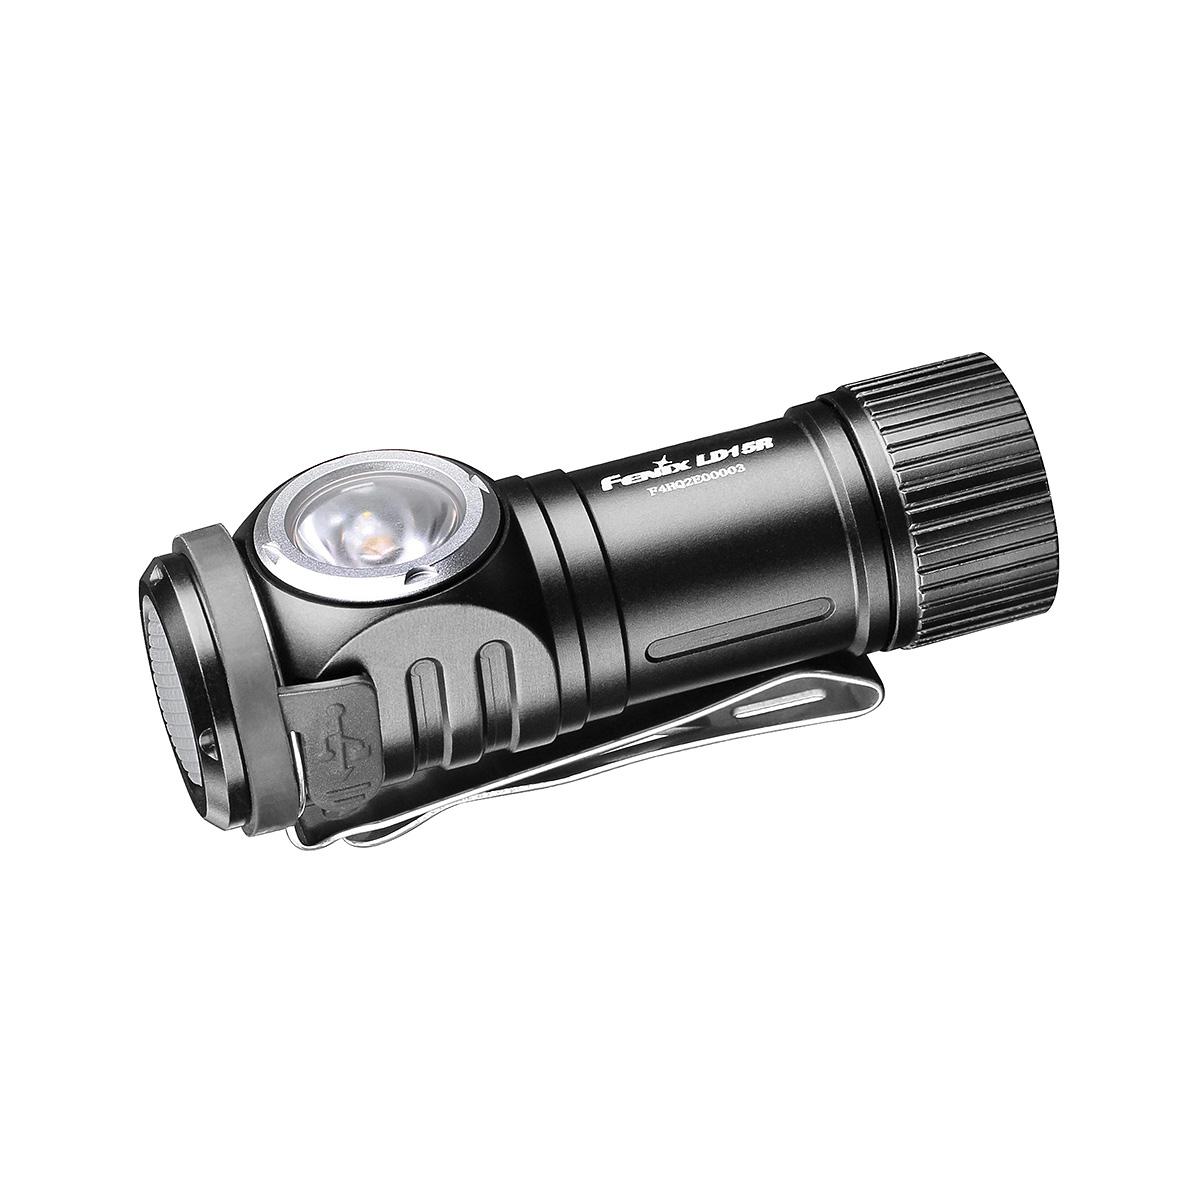  Ld15r Usb Rechargeable Right Angle Flashlight